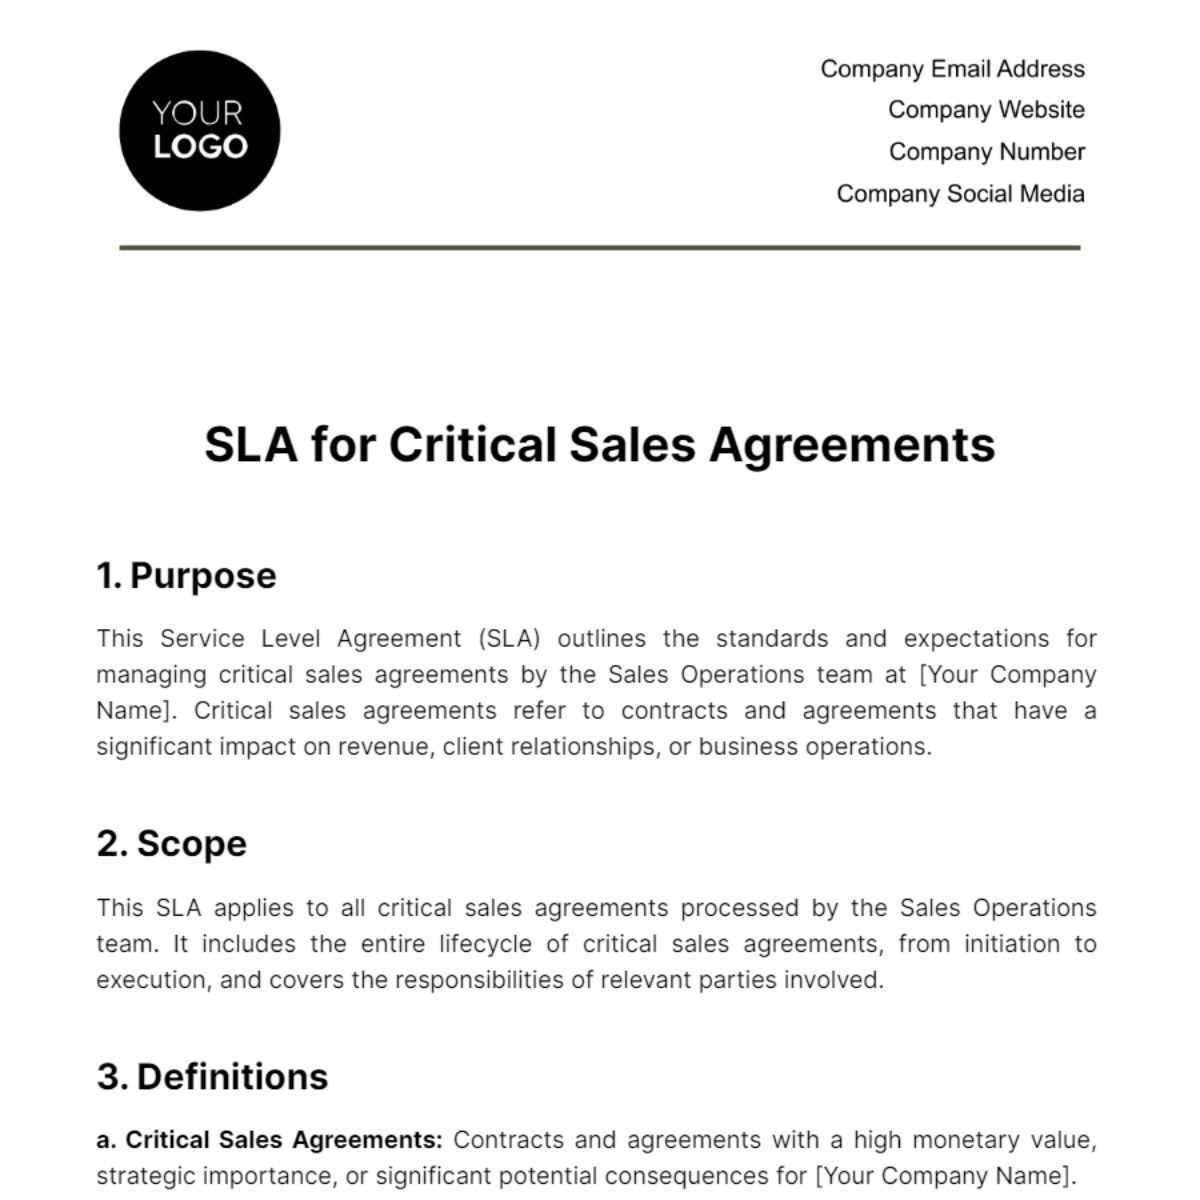 Free SLA for Critical Sales Agreements Template